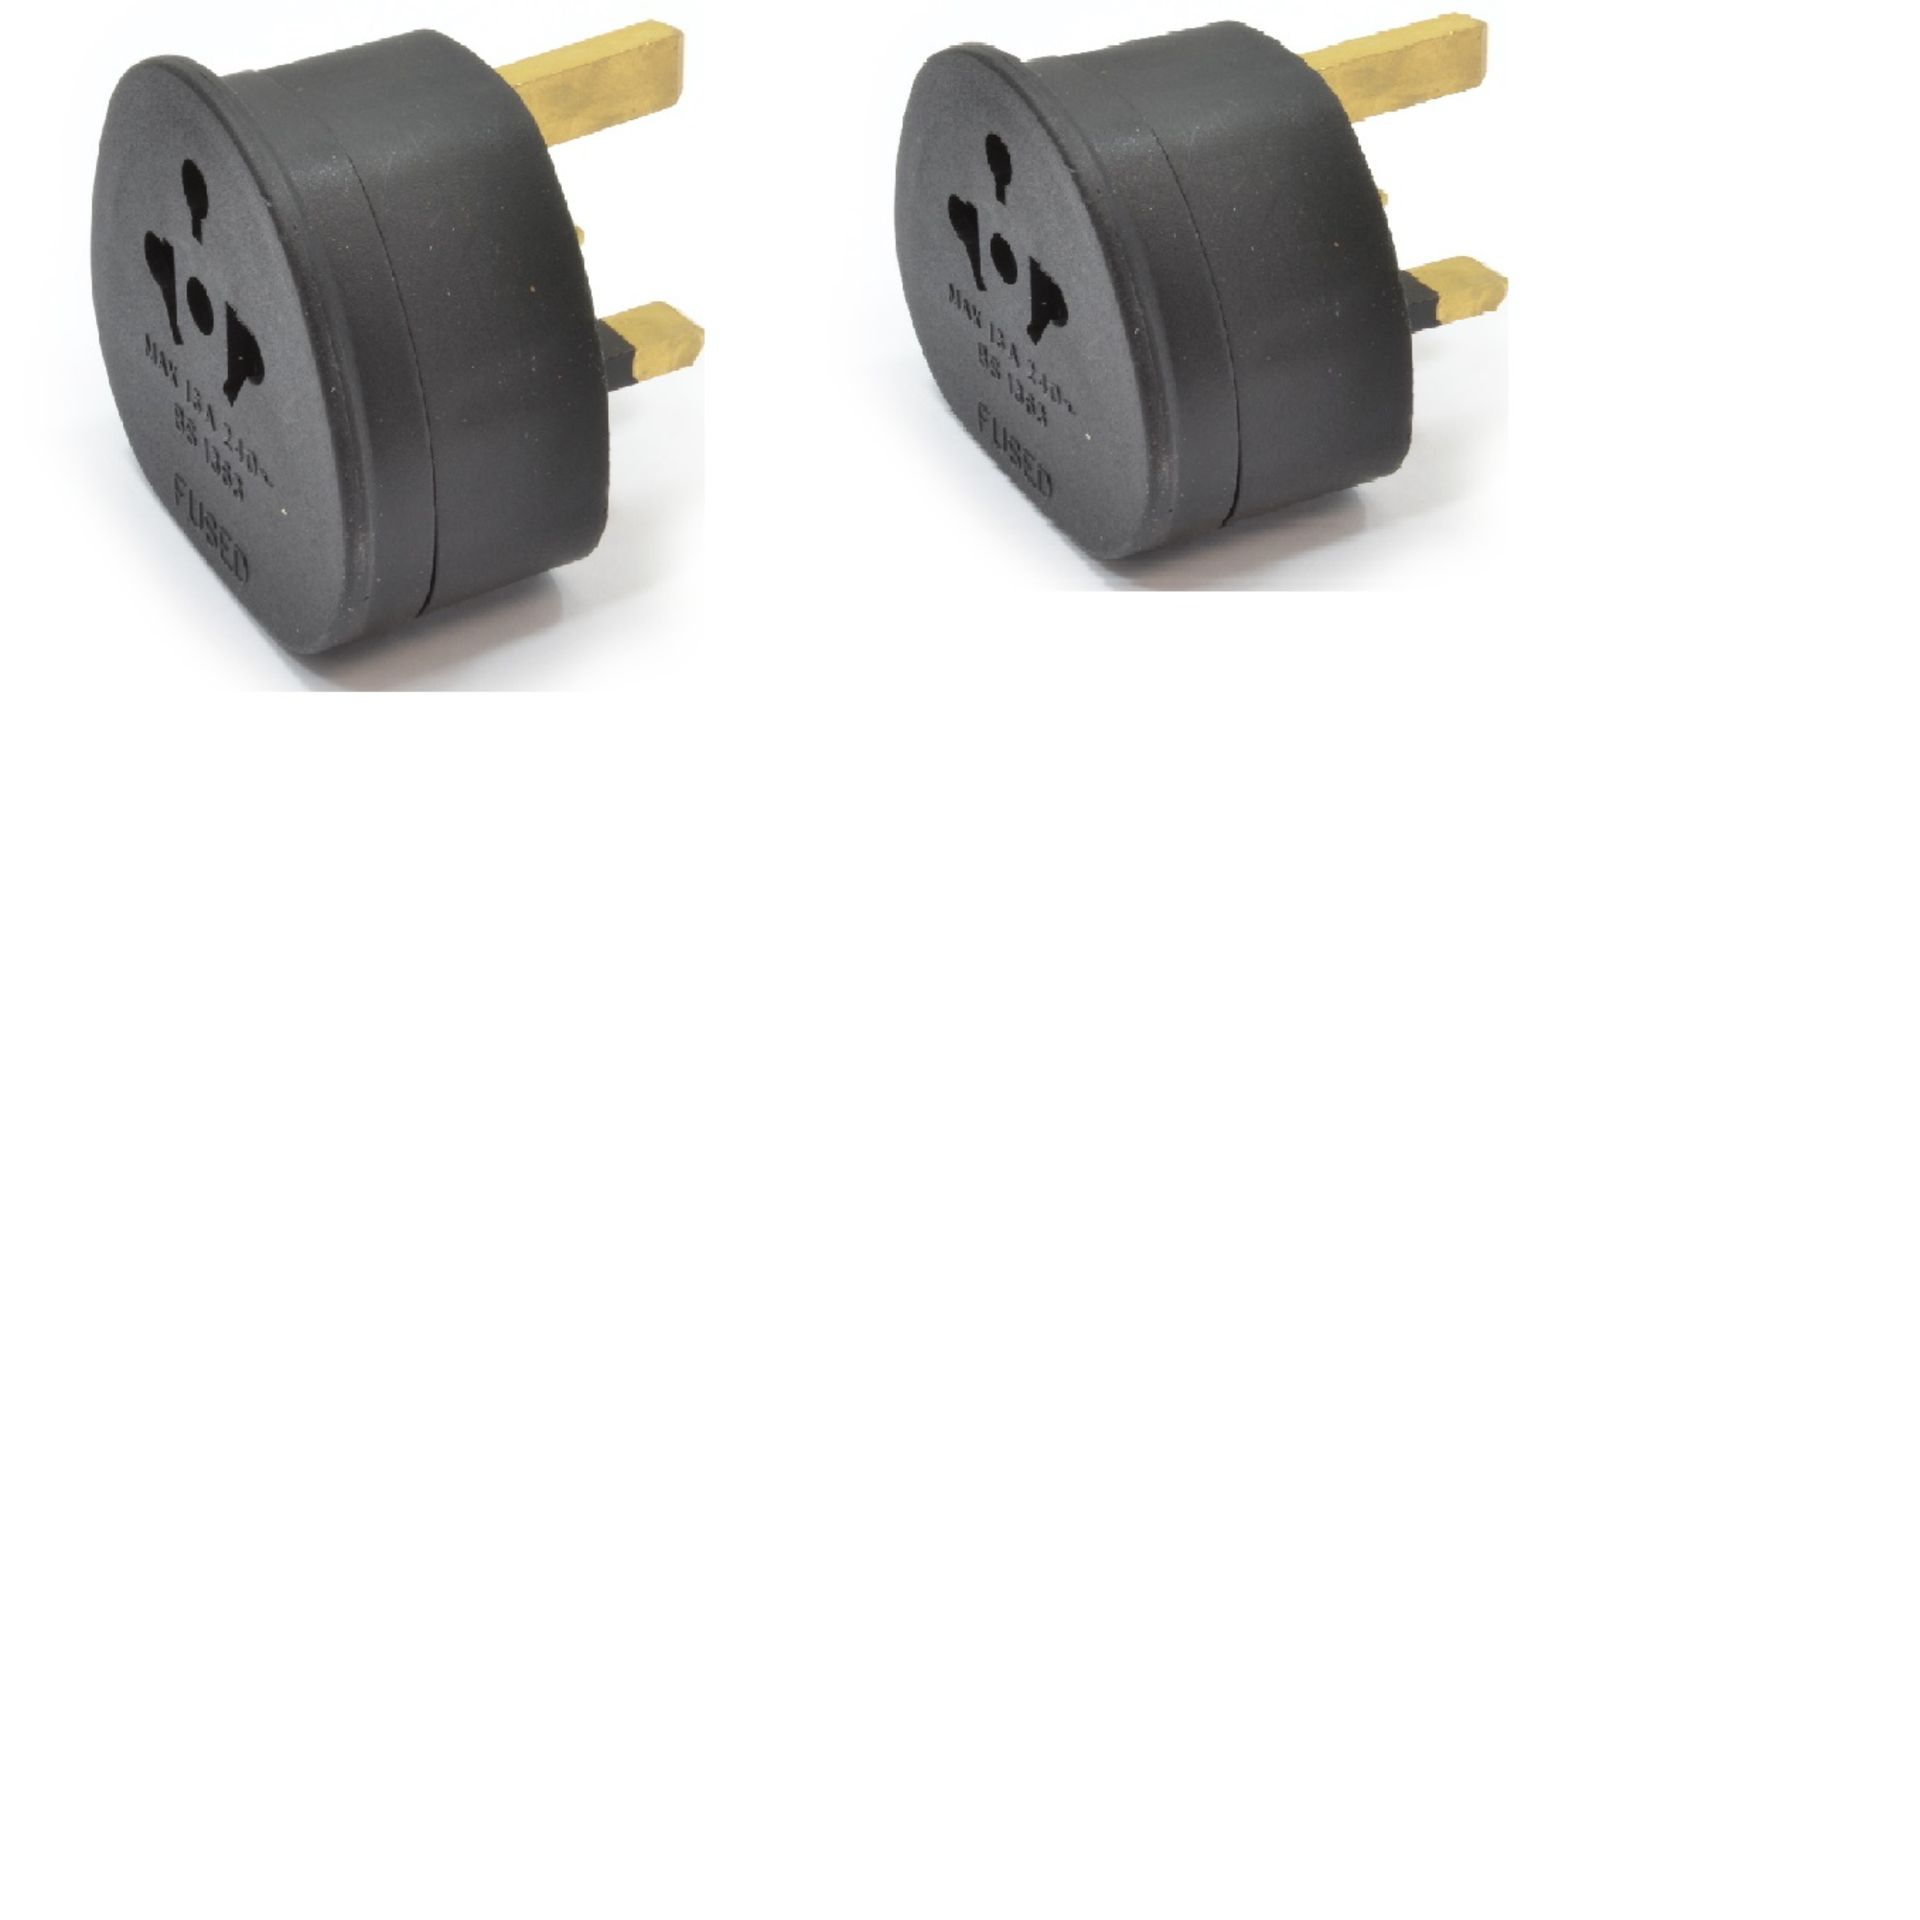 V Brand New A Lot Of Two SMJ Electrical UK & Ireland Plug Adaptor X 2 YOUR BID PRICE TO BE